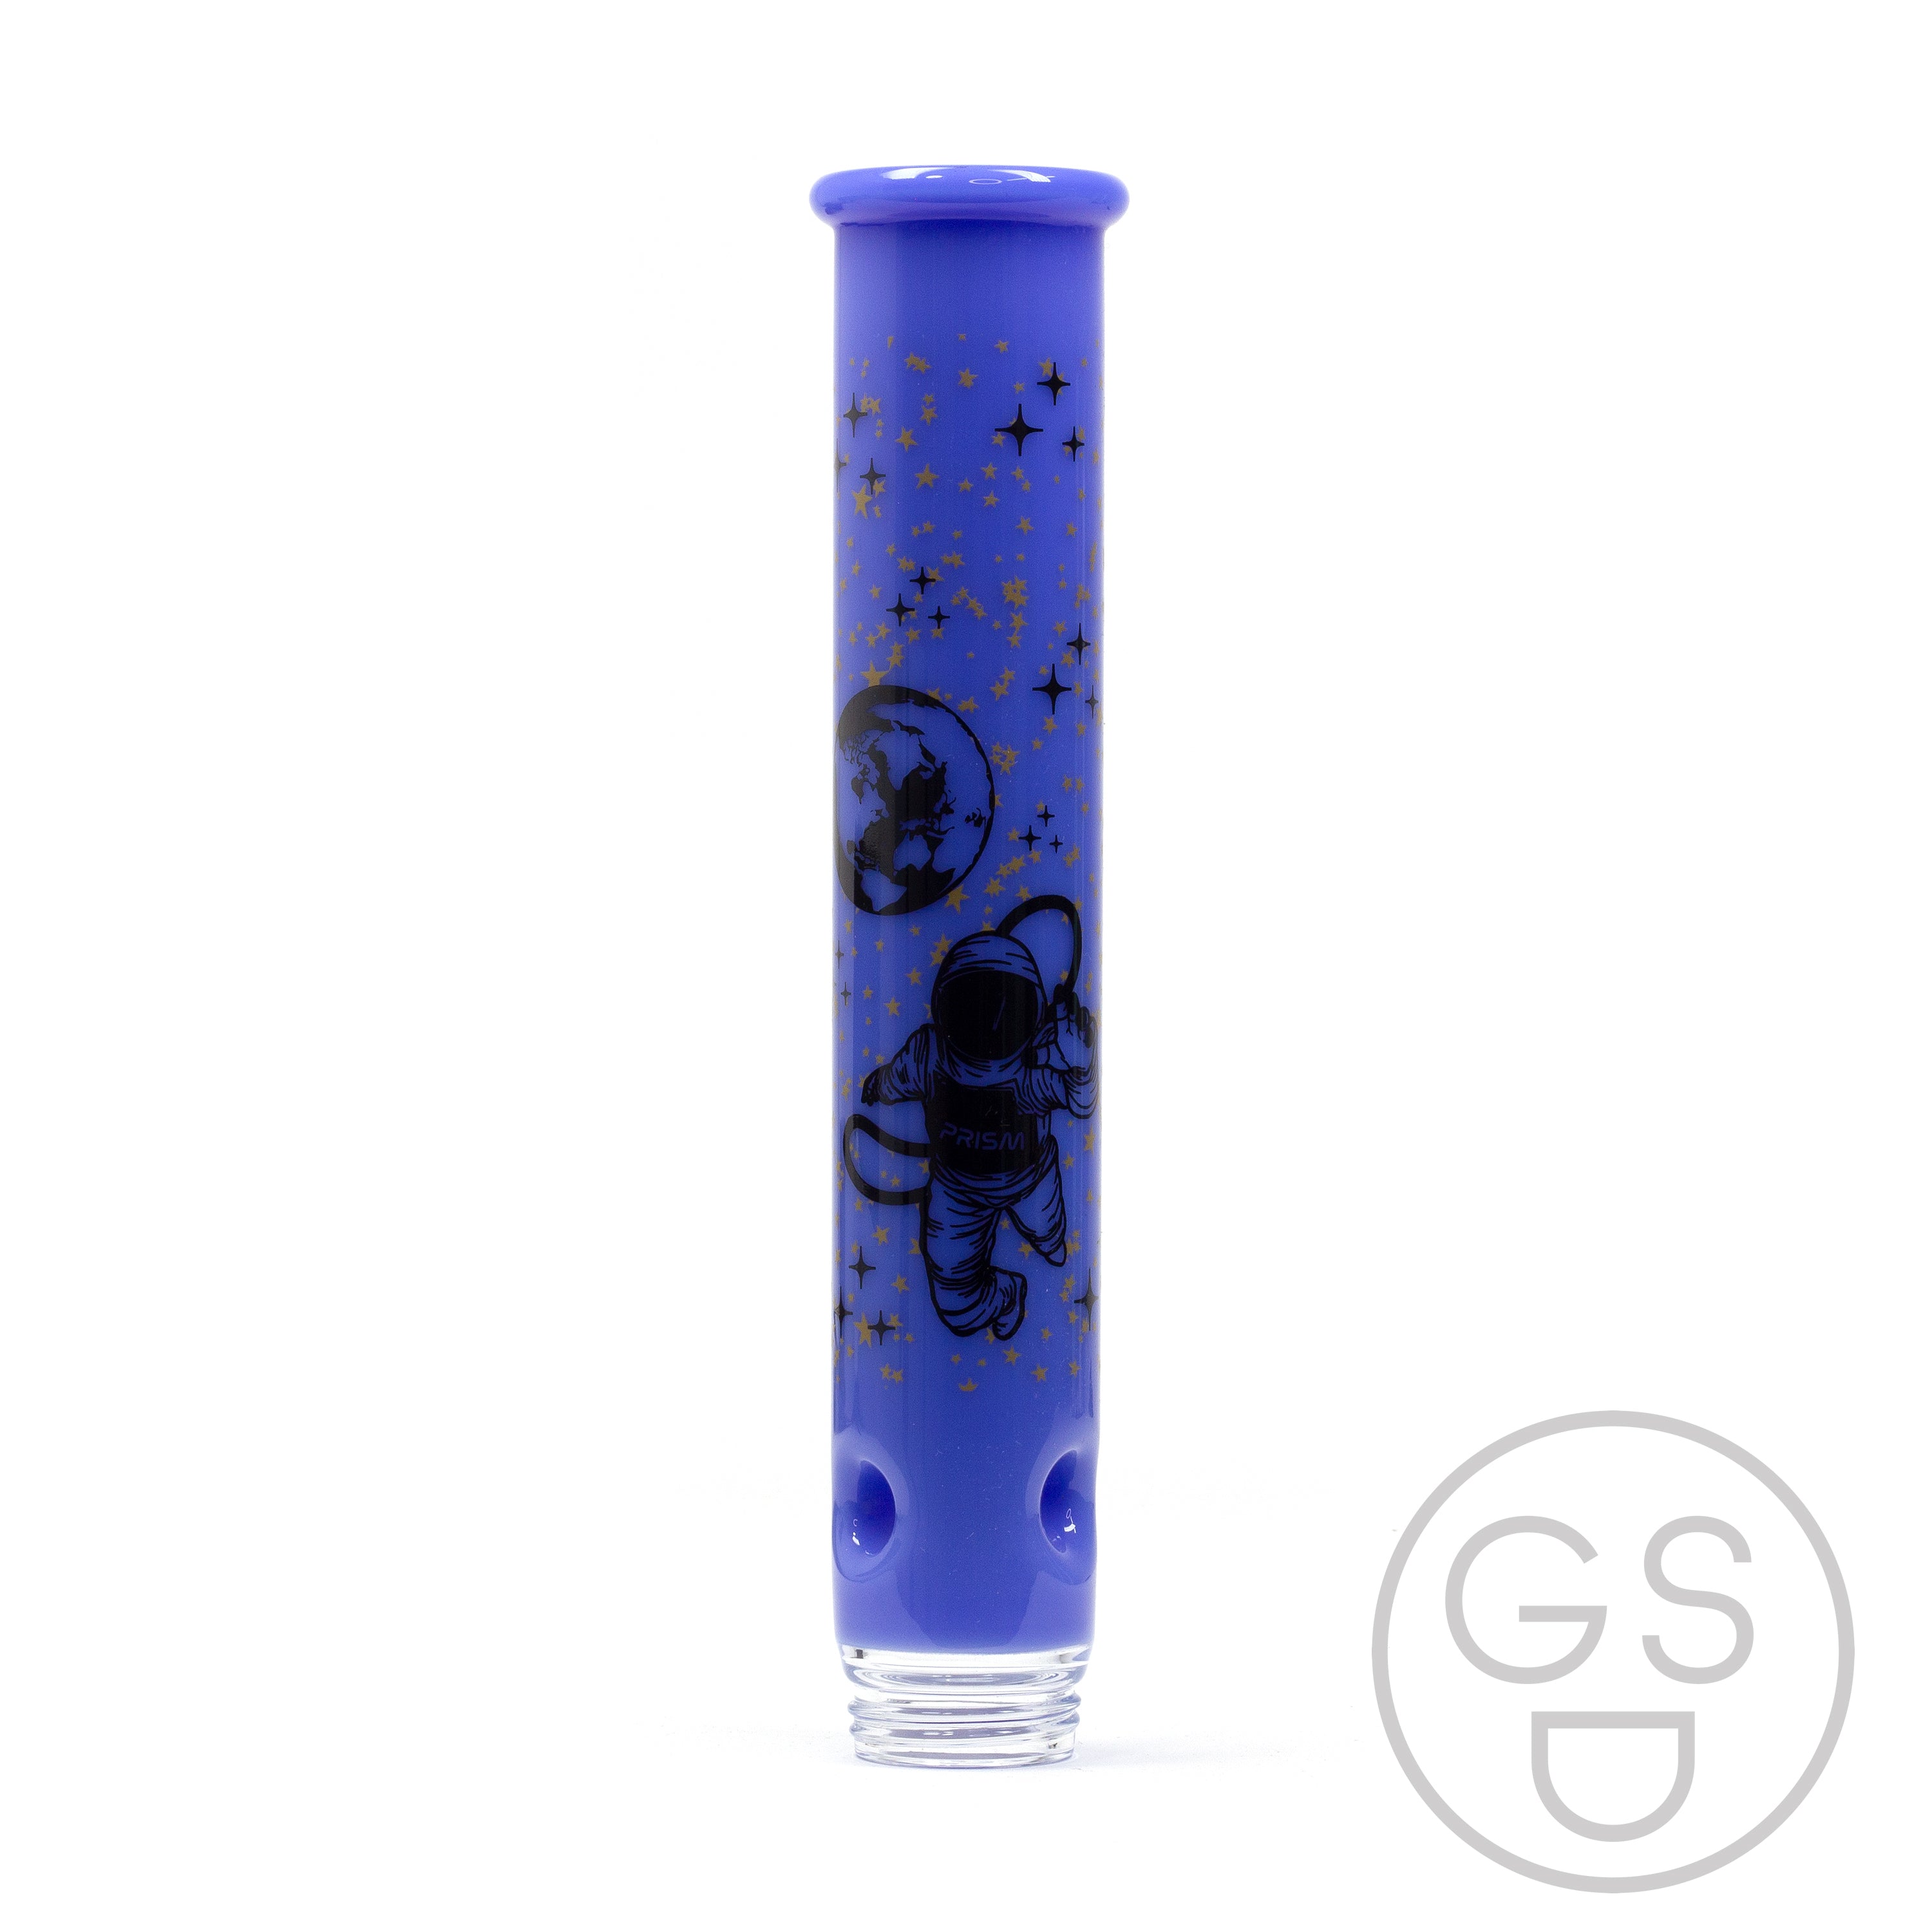 Prism Modular Waterpipe Tall Mouthpiece - Spaced Out / Blueberry